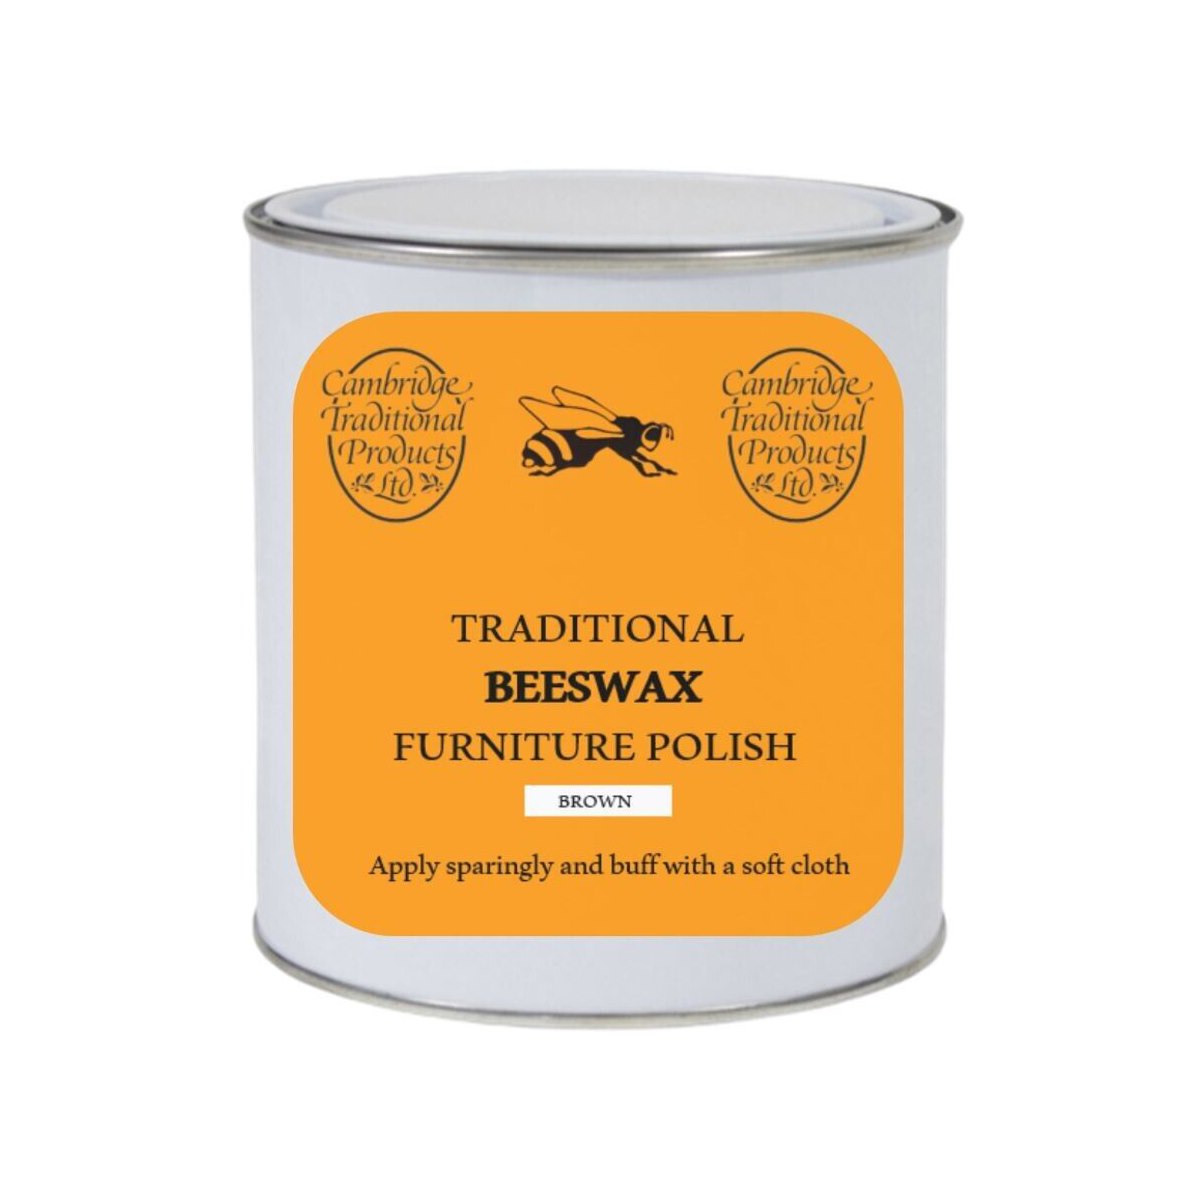 Cambridge Traditional Products Beeswax Brown Polish 1.8kg